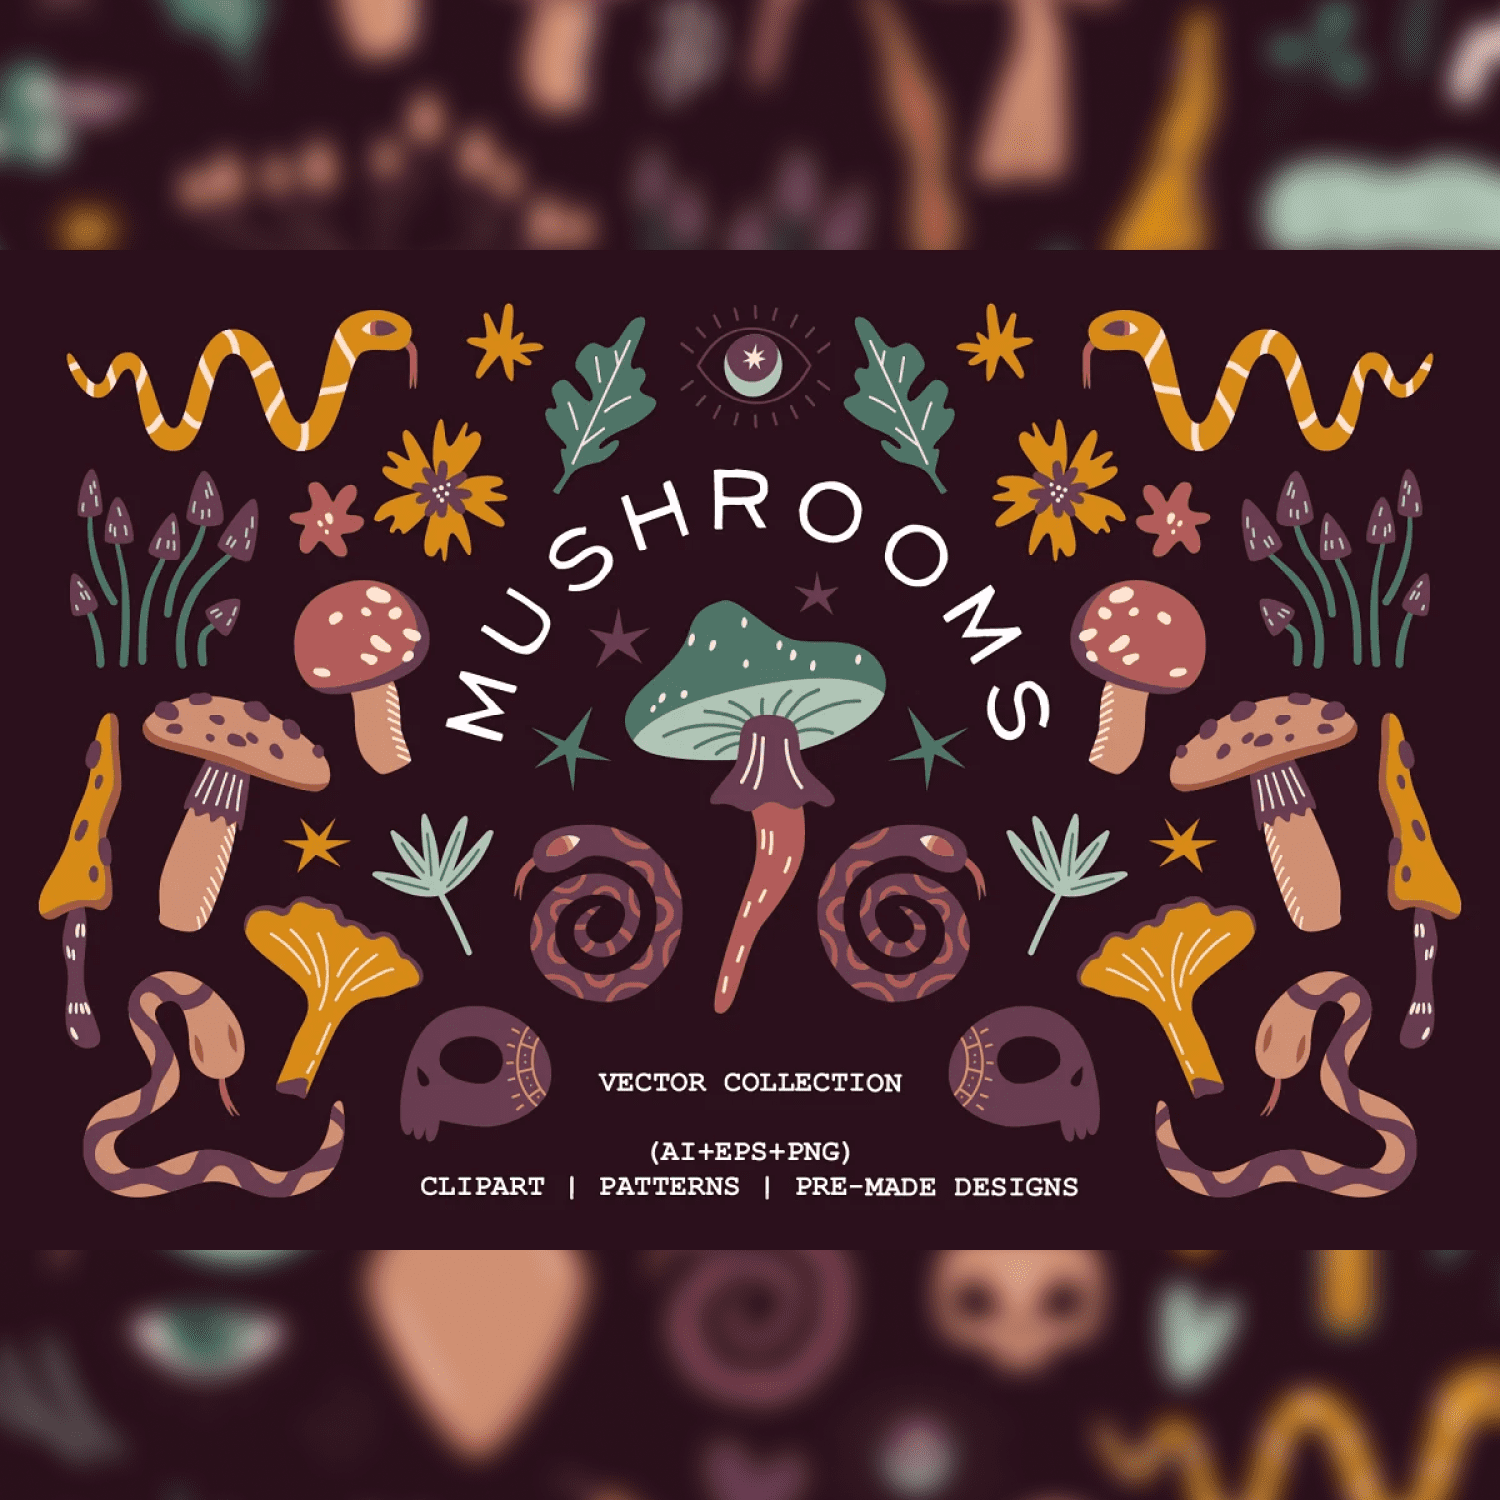 Mushrooms. vector collection - main image preview.